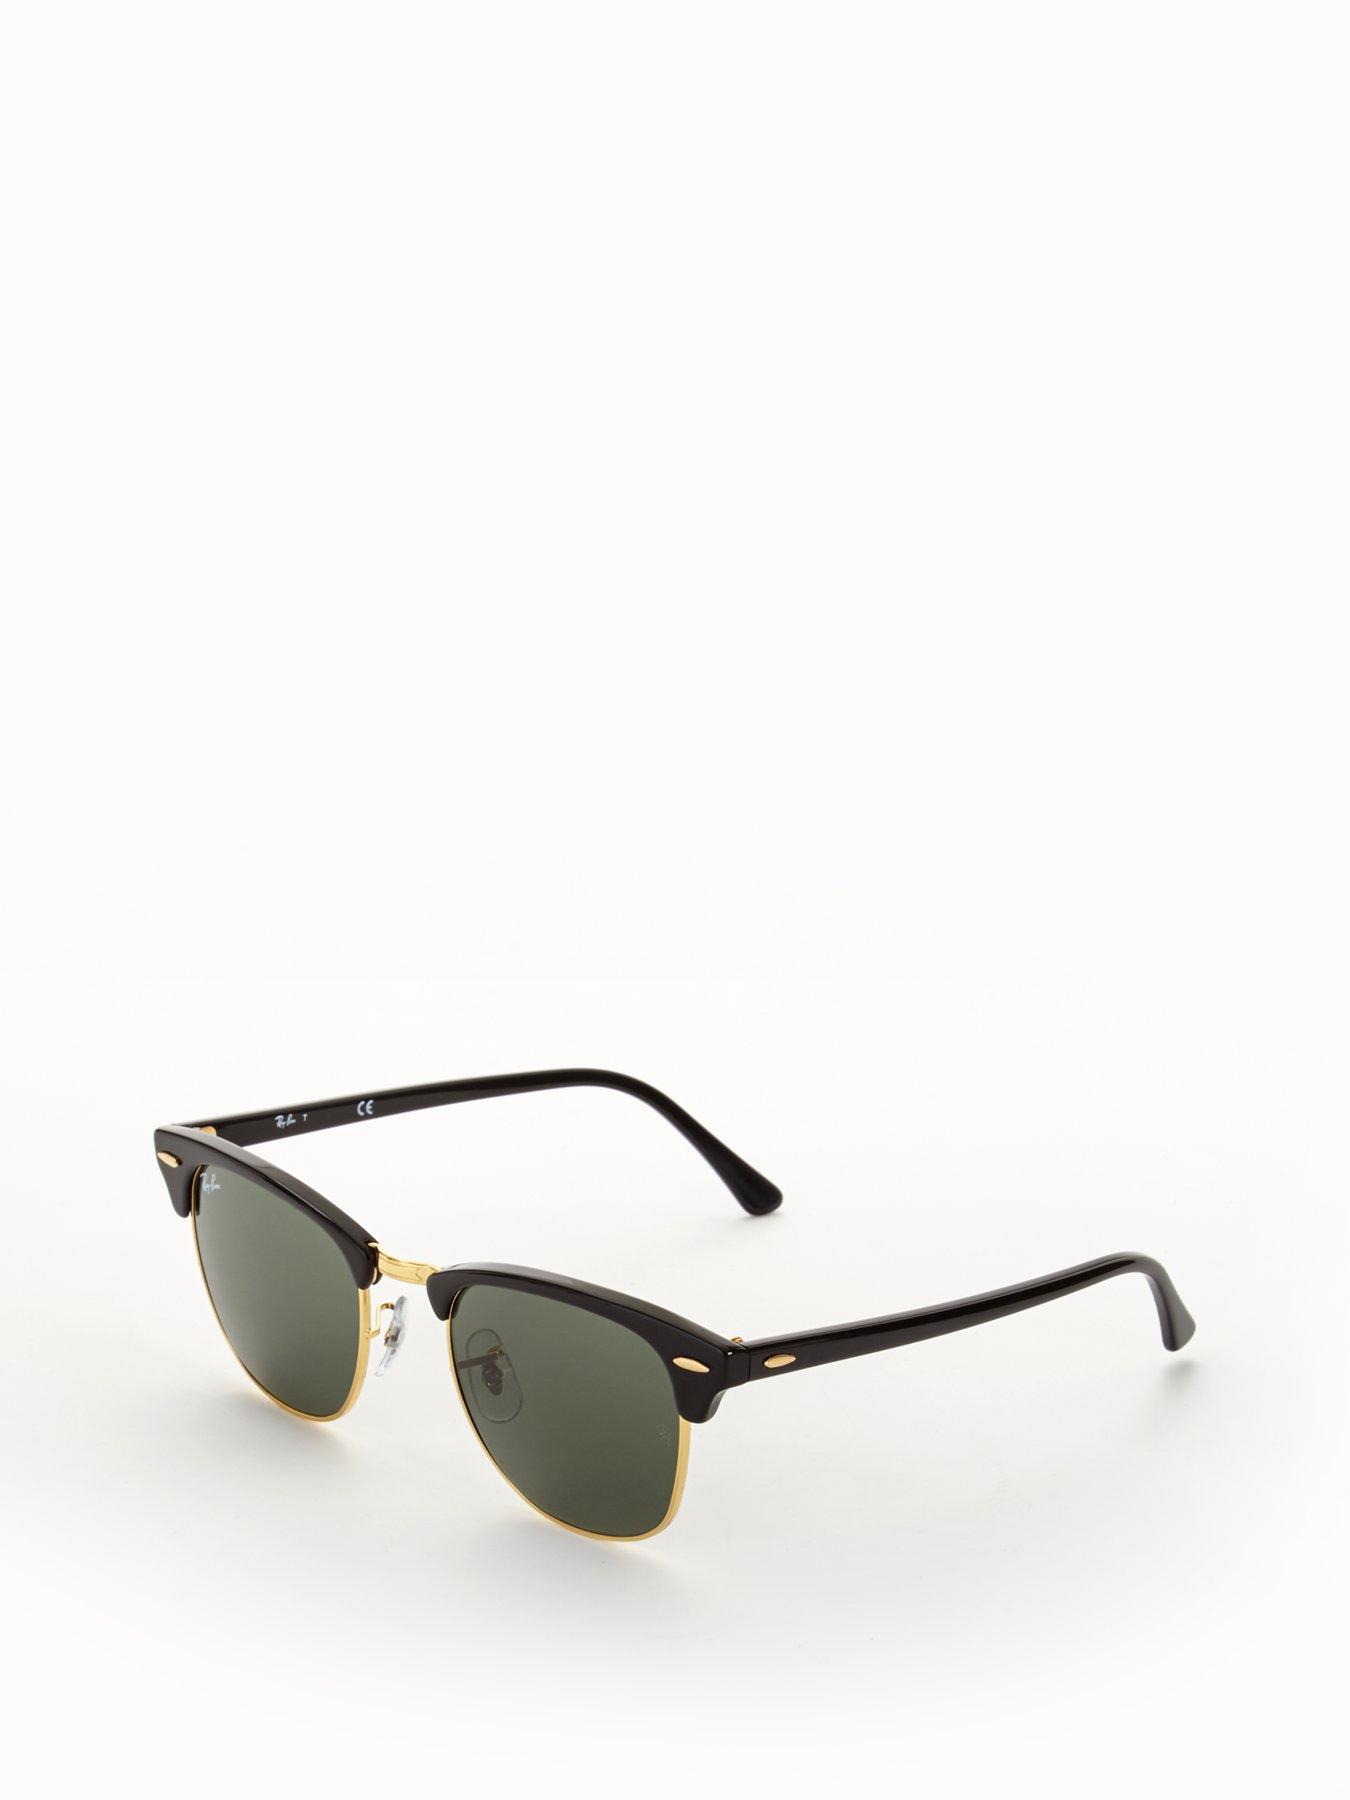 clubmaster classic ray bans